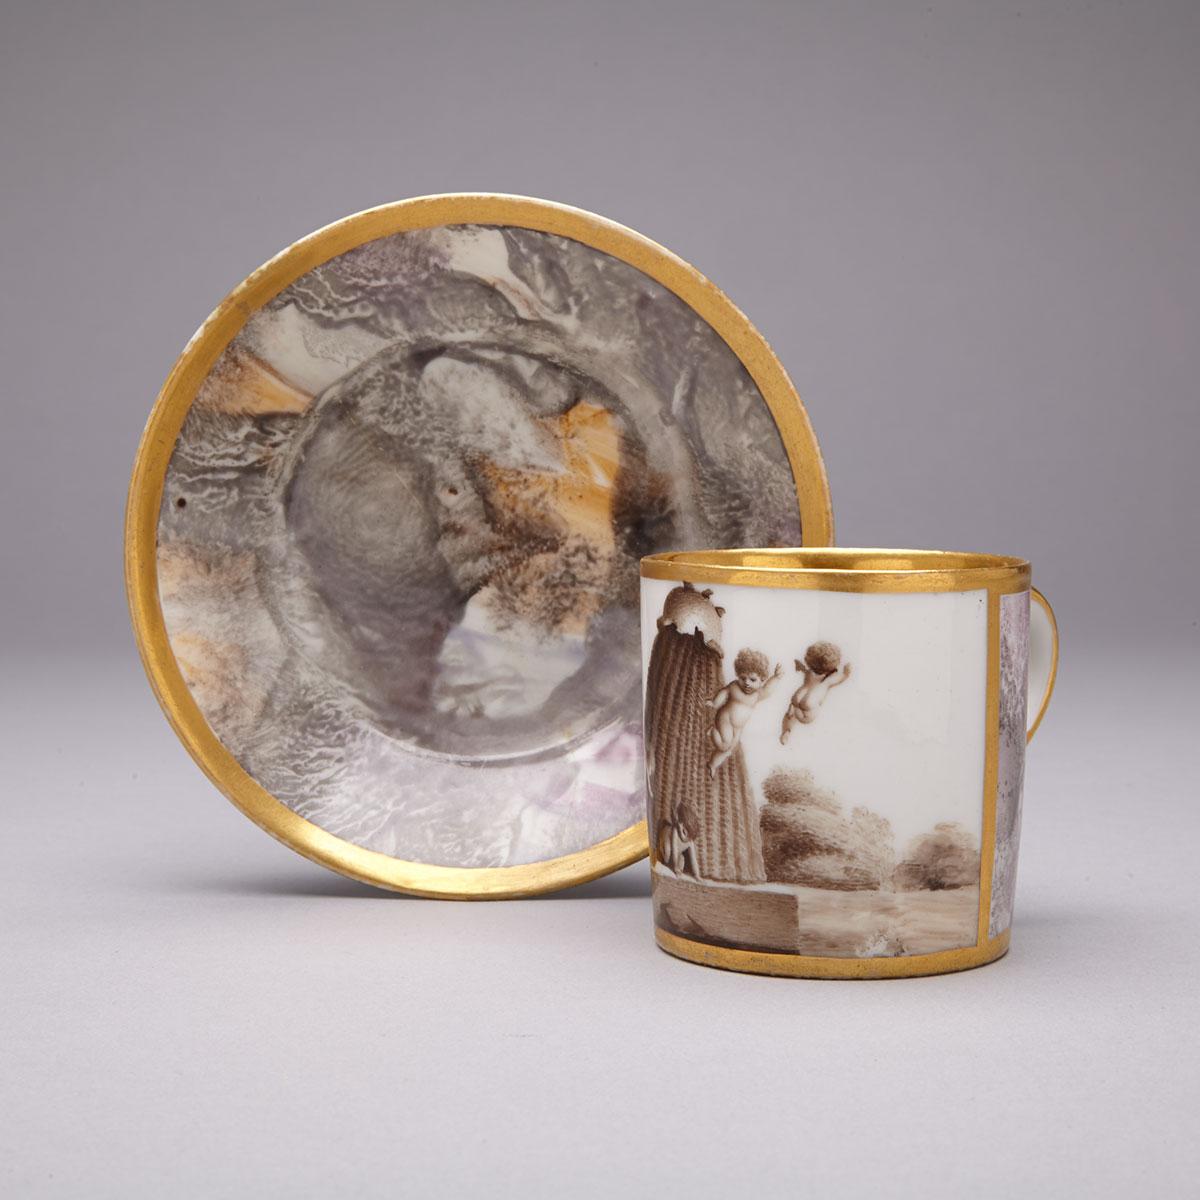 P.L. Dagoty, Paris Marbled Ground Coffee Can and Saucer, c.1810